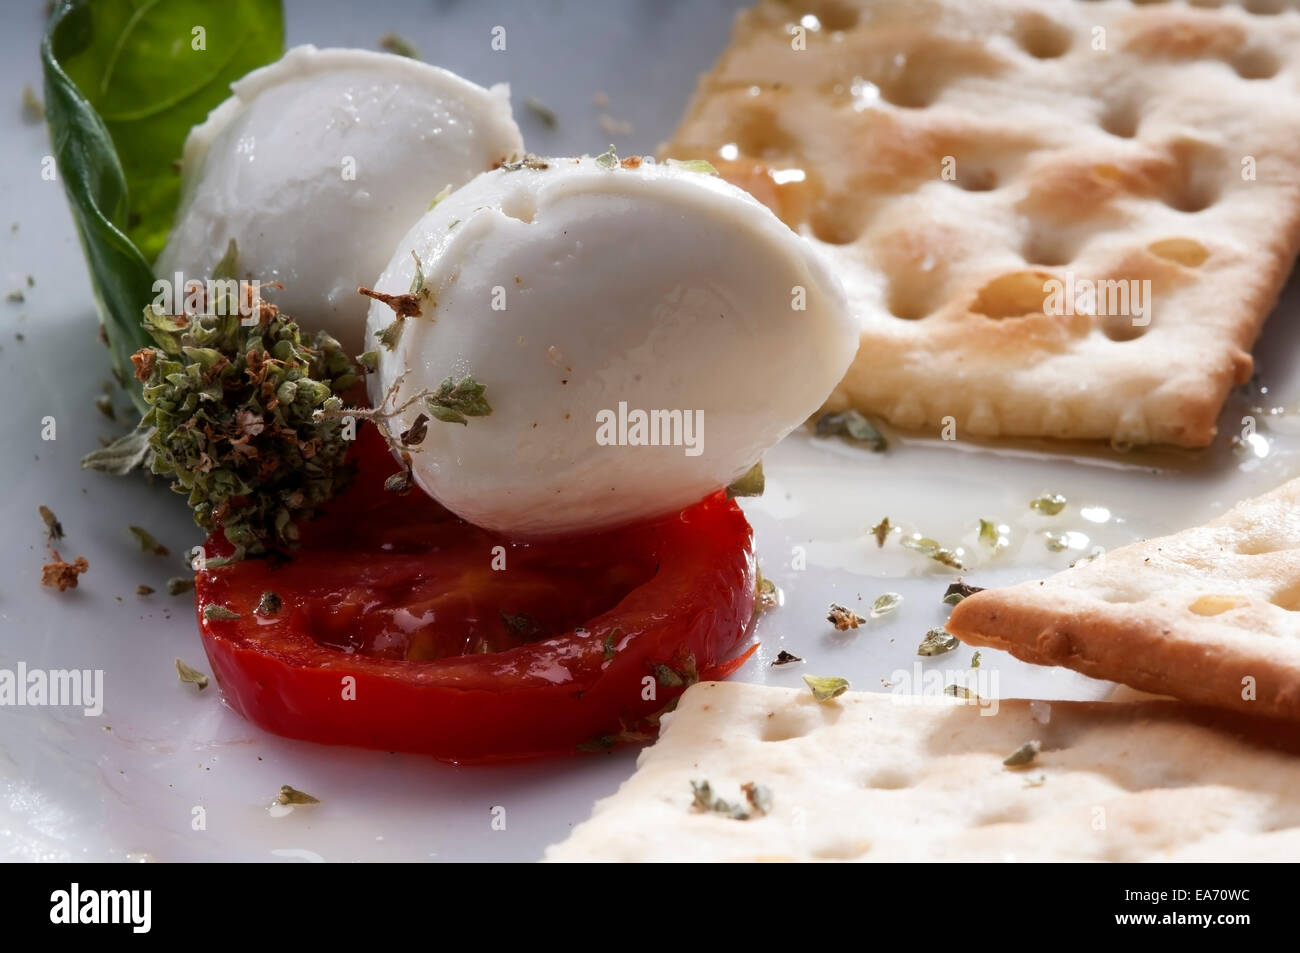 Caprese salad with buffalo milk mozzarella ,with olive oil, tomatoes and oregano. a typical Italian appetizer Stock Photo